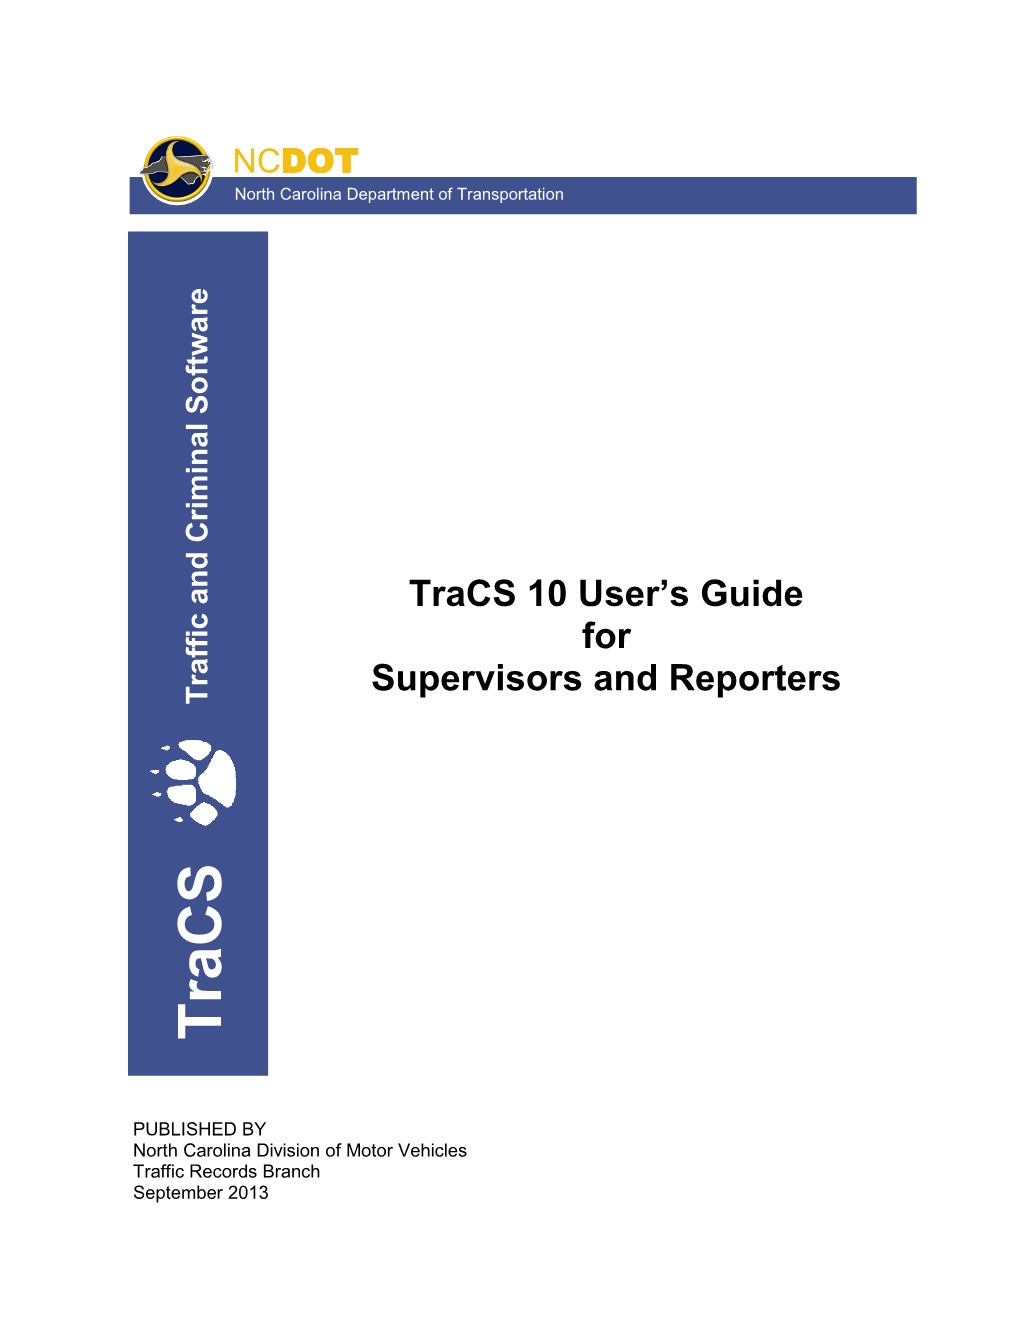 Tracs 10 User's Guide for Supervisors and Reporters